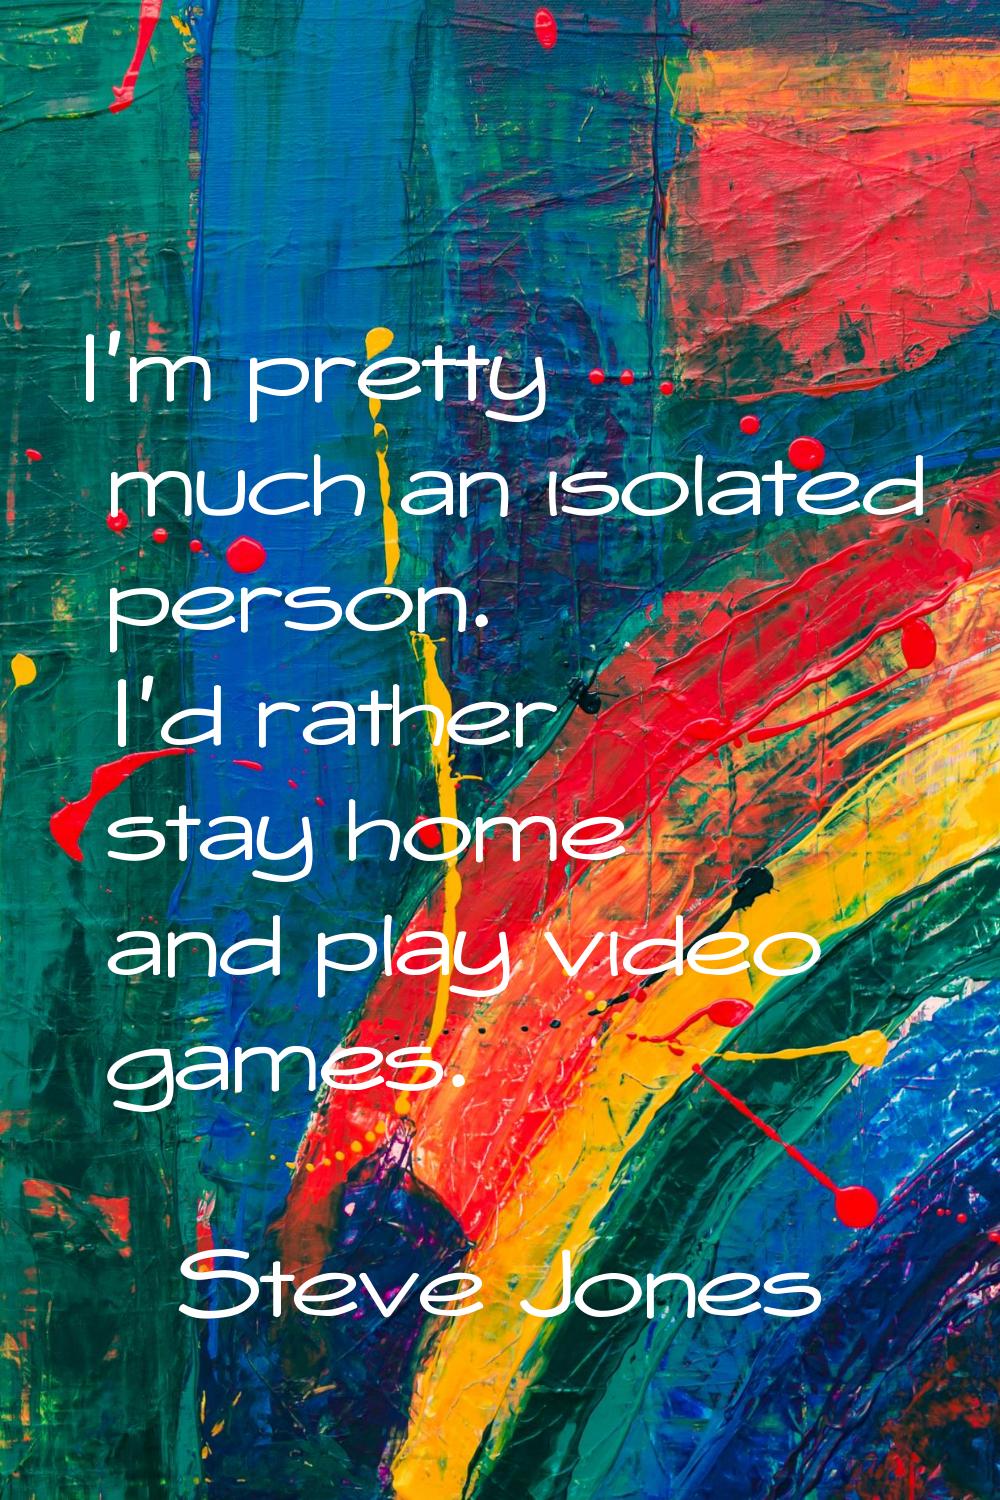 I'm pretty much an isolated person. I'd rather stay home and play video games.